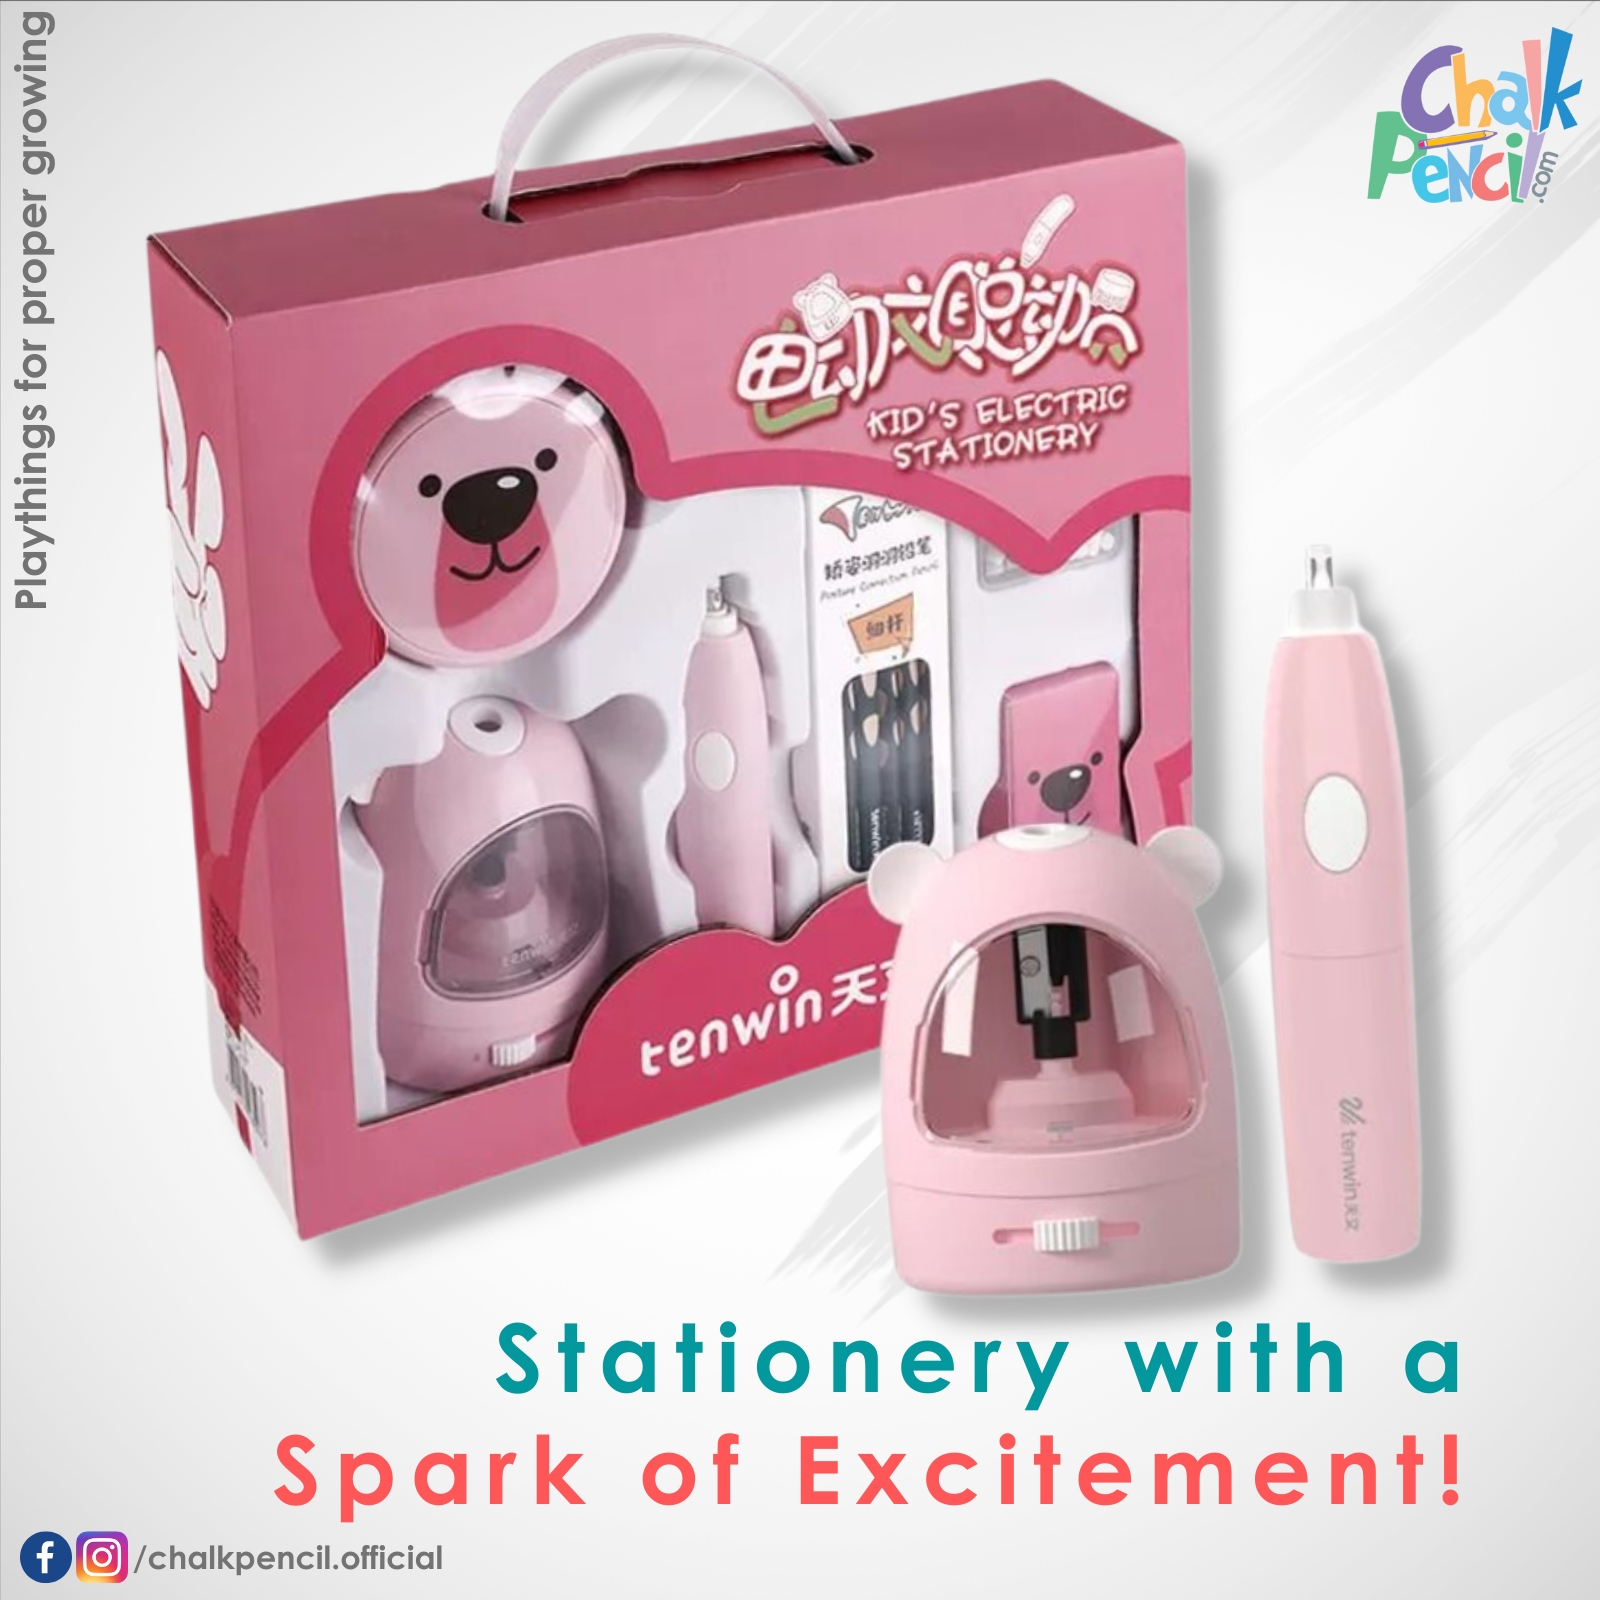 Electric Cute Stationary Set